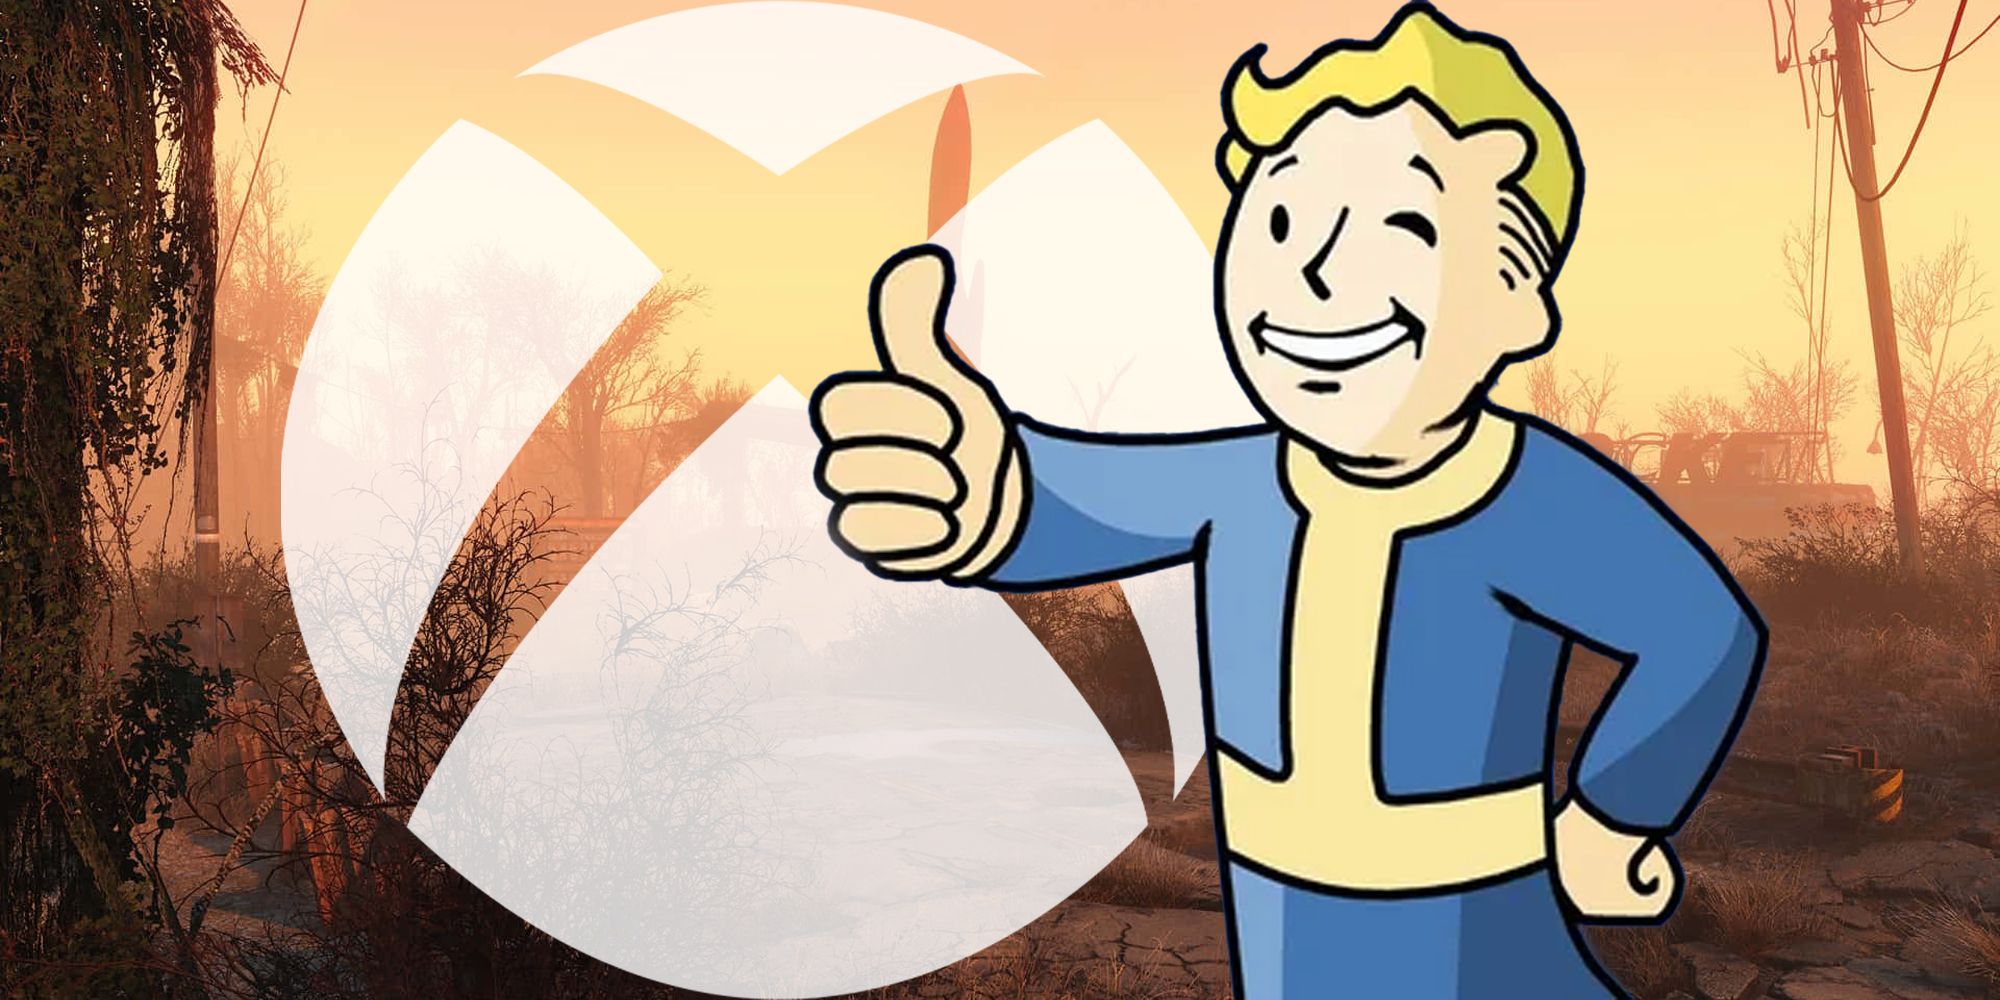 There May Be One Reason Xbox Is Much Better For Fallout 4's Next-Gen Update